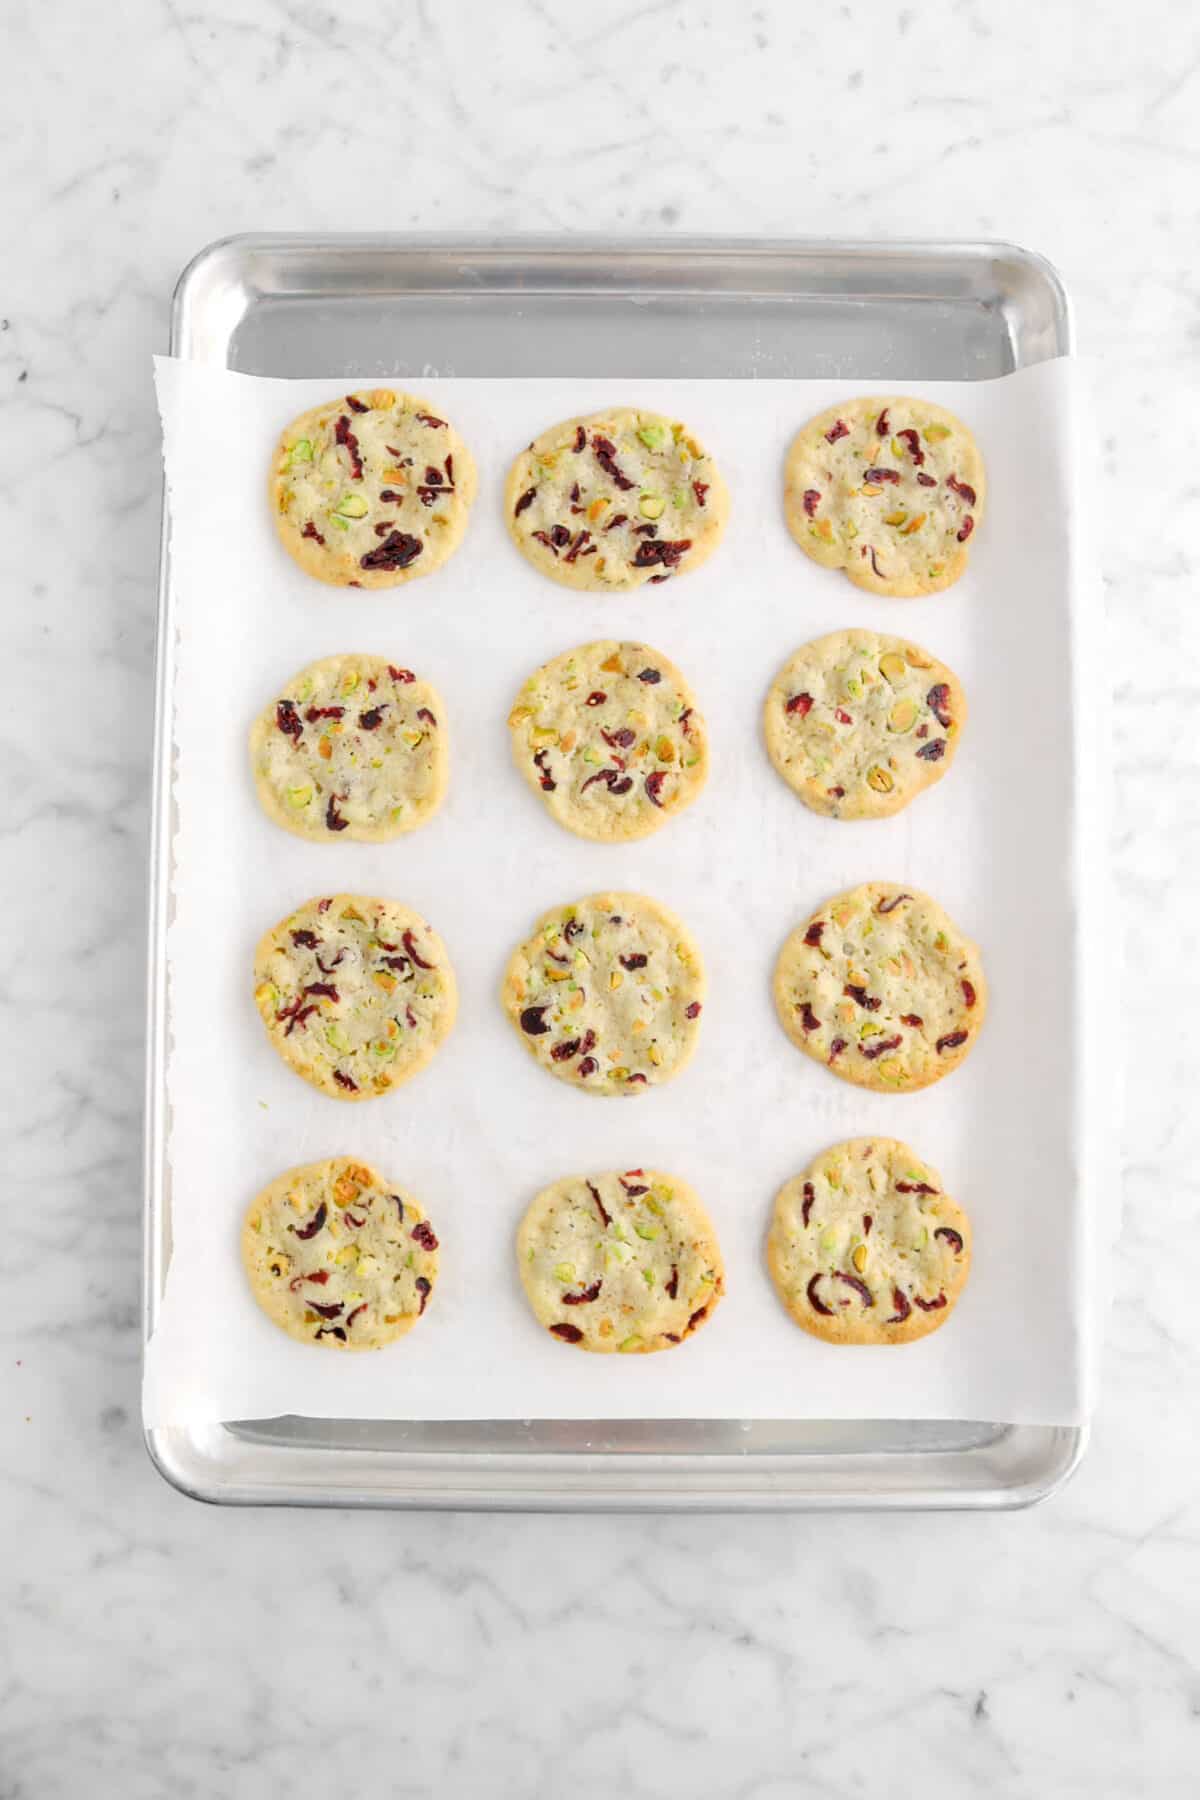 12 baked cookies on lined sheet pan